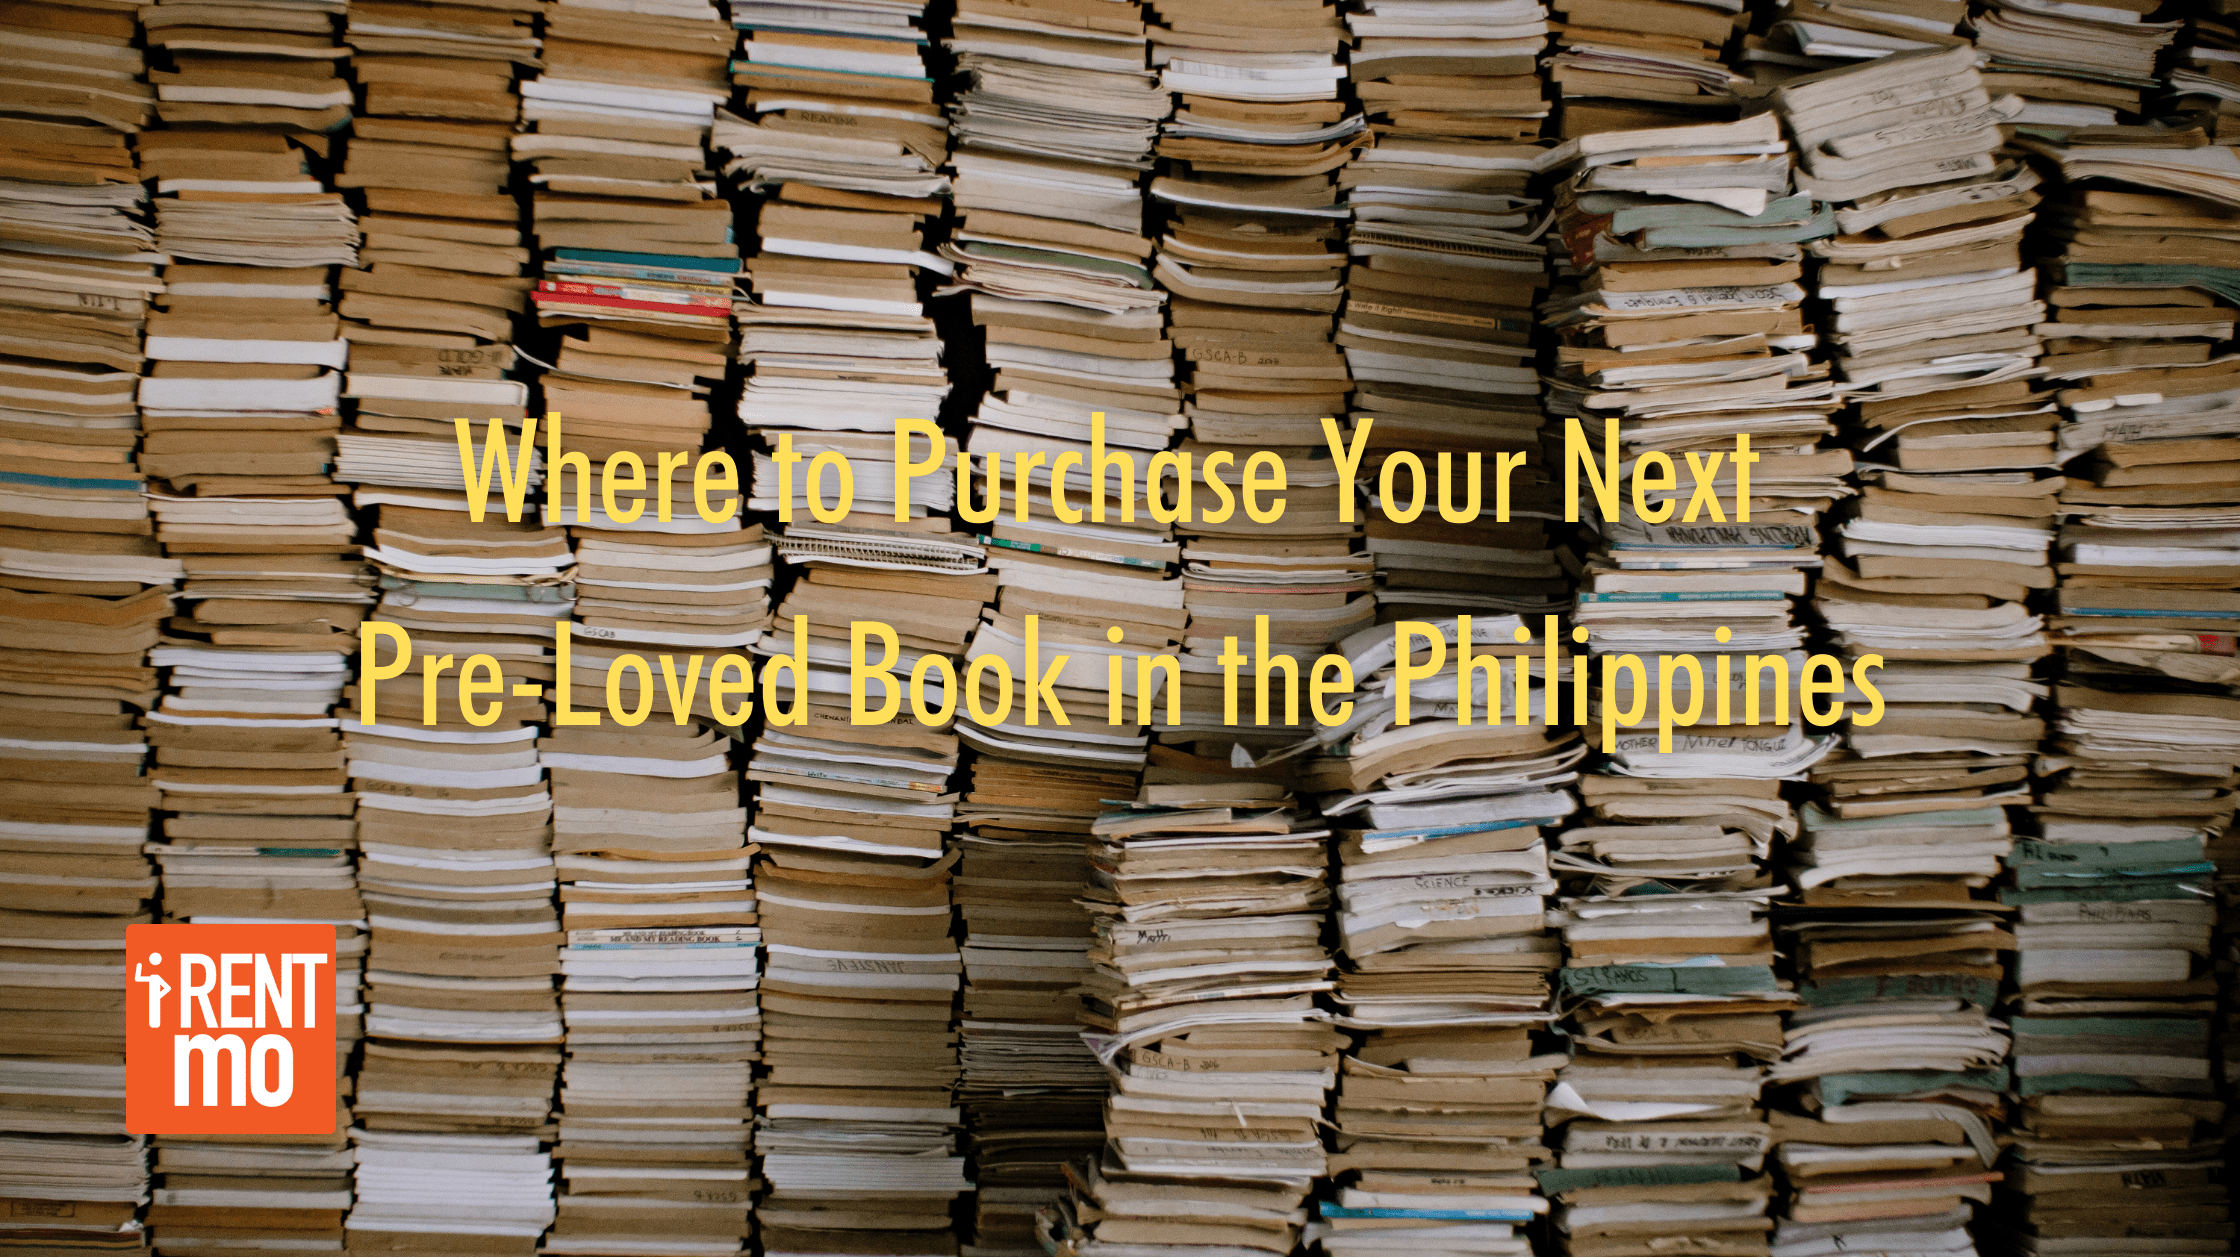 Where to Purchase Pre-Loved Books in the Philippines